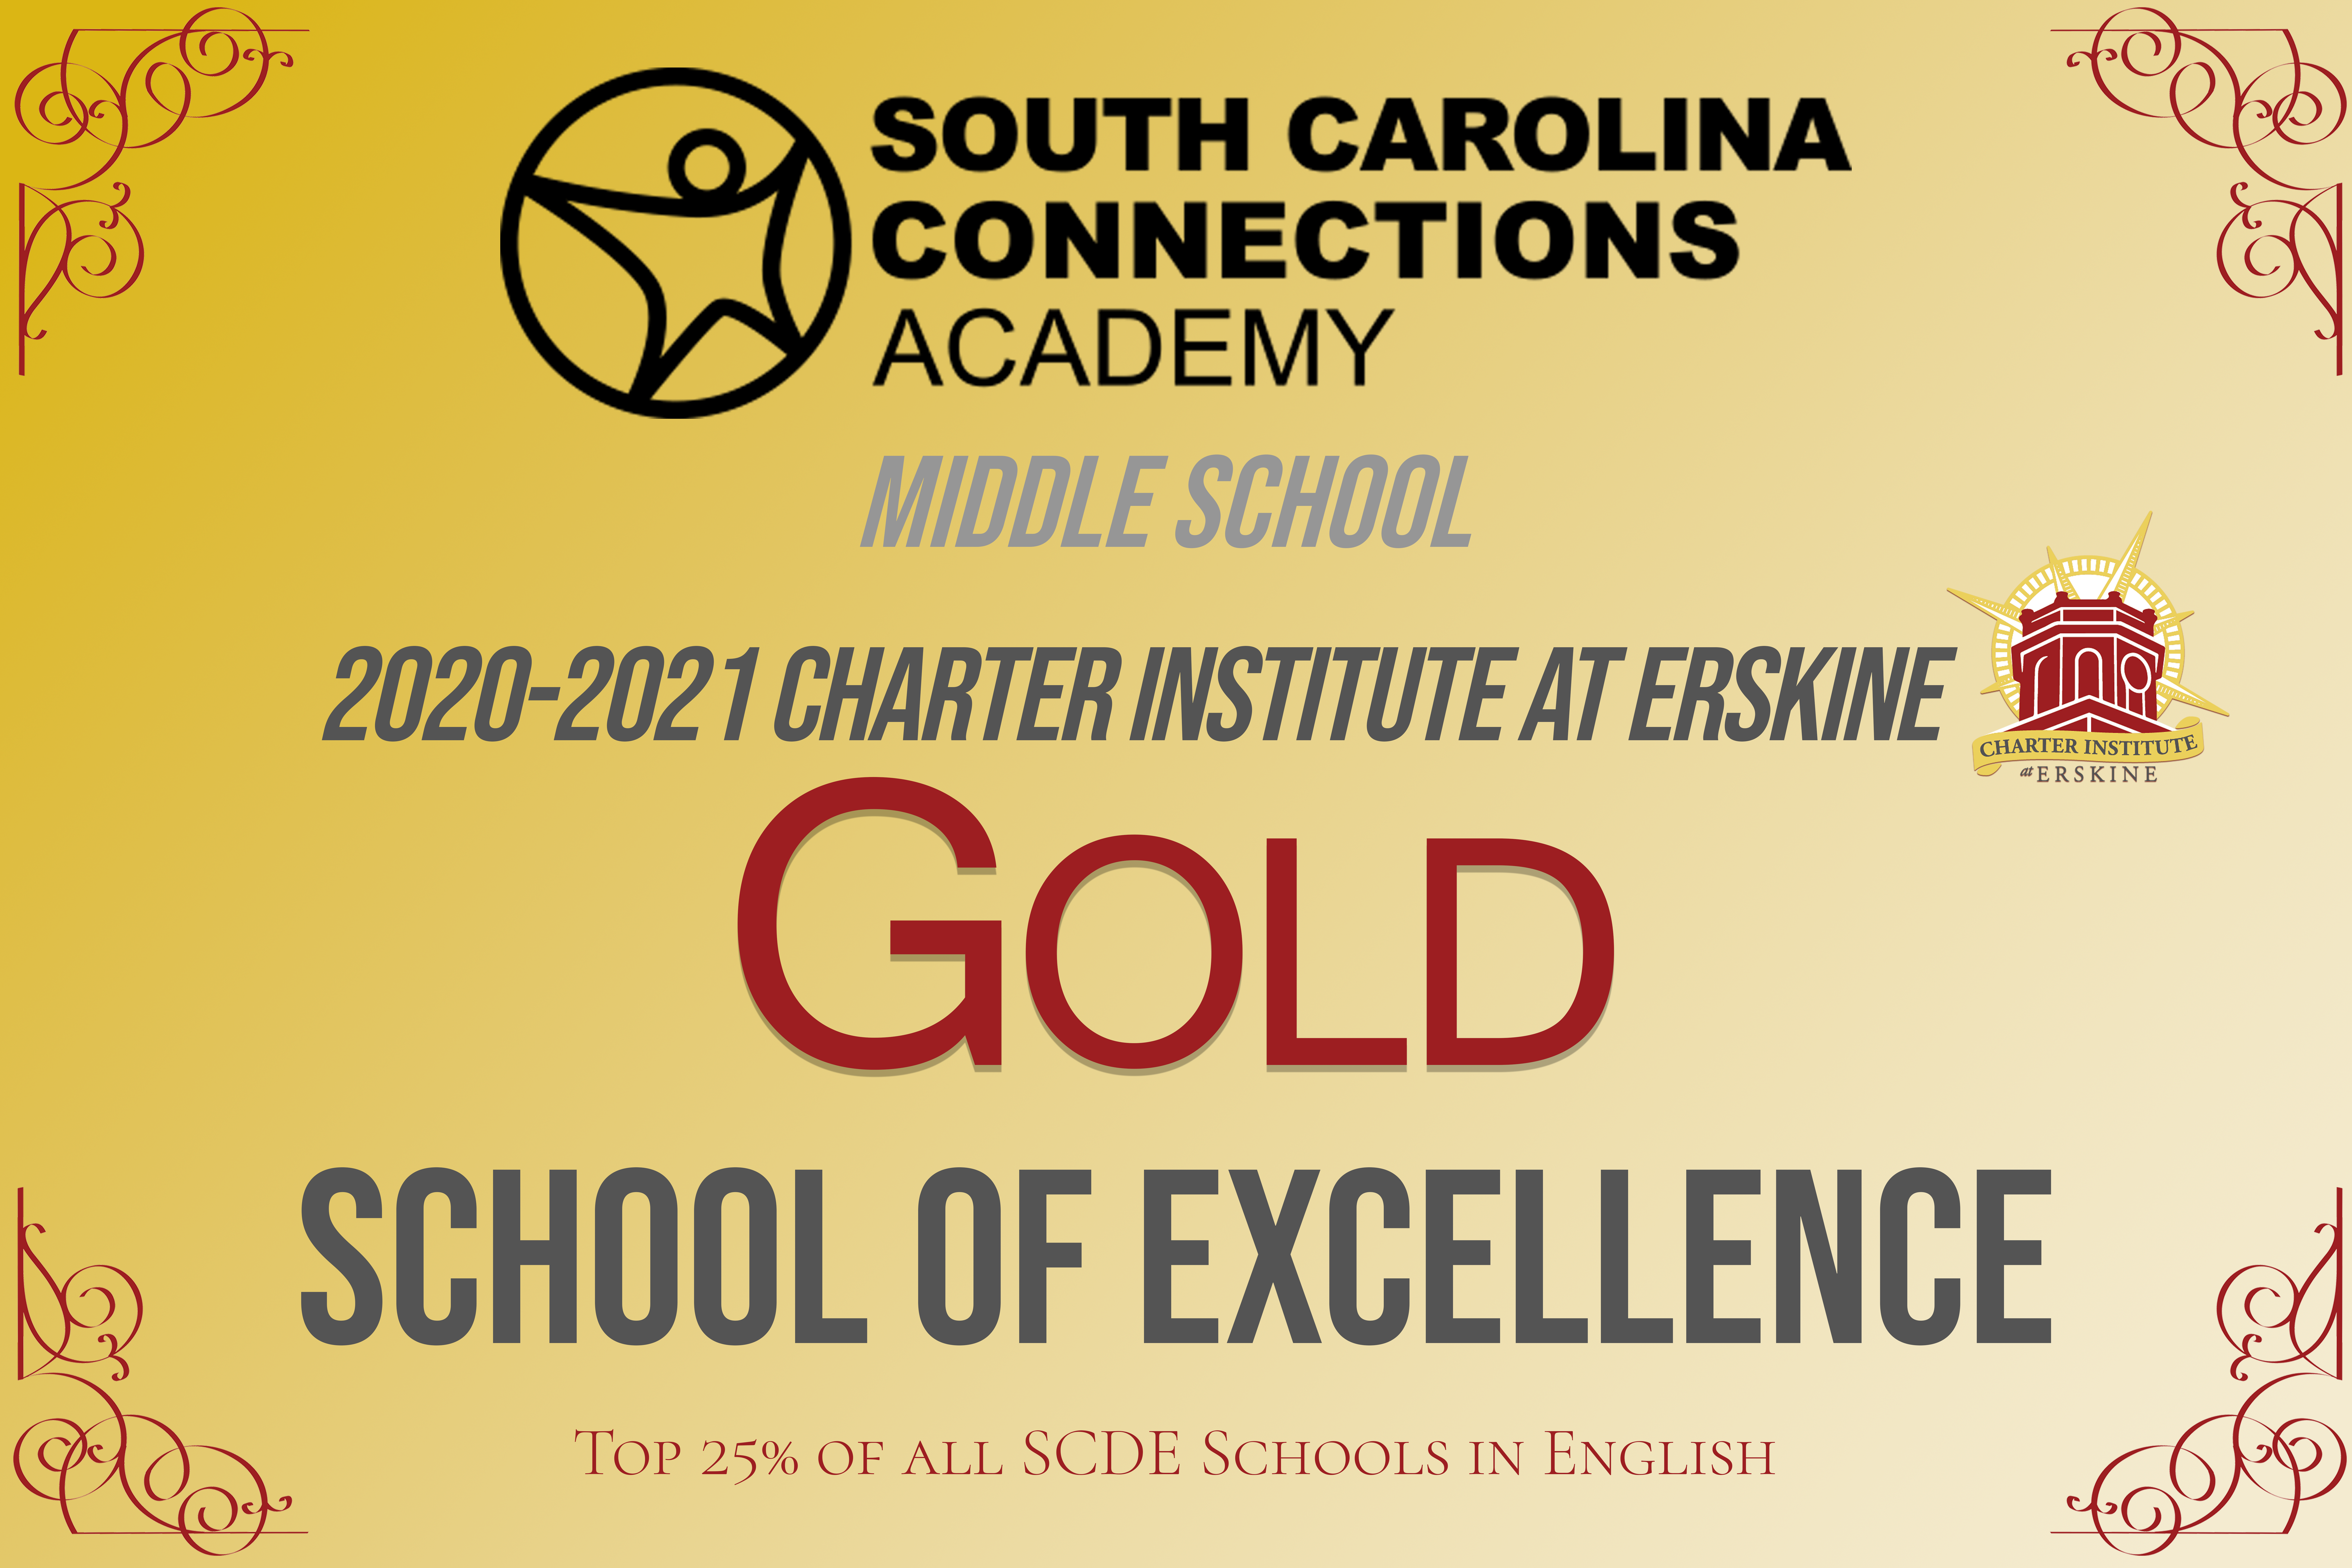 South Carolina Connections Academy - Middle School - Gold School of Excellence